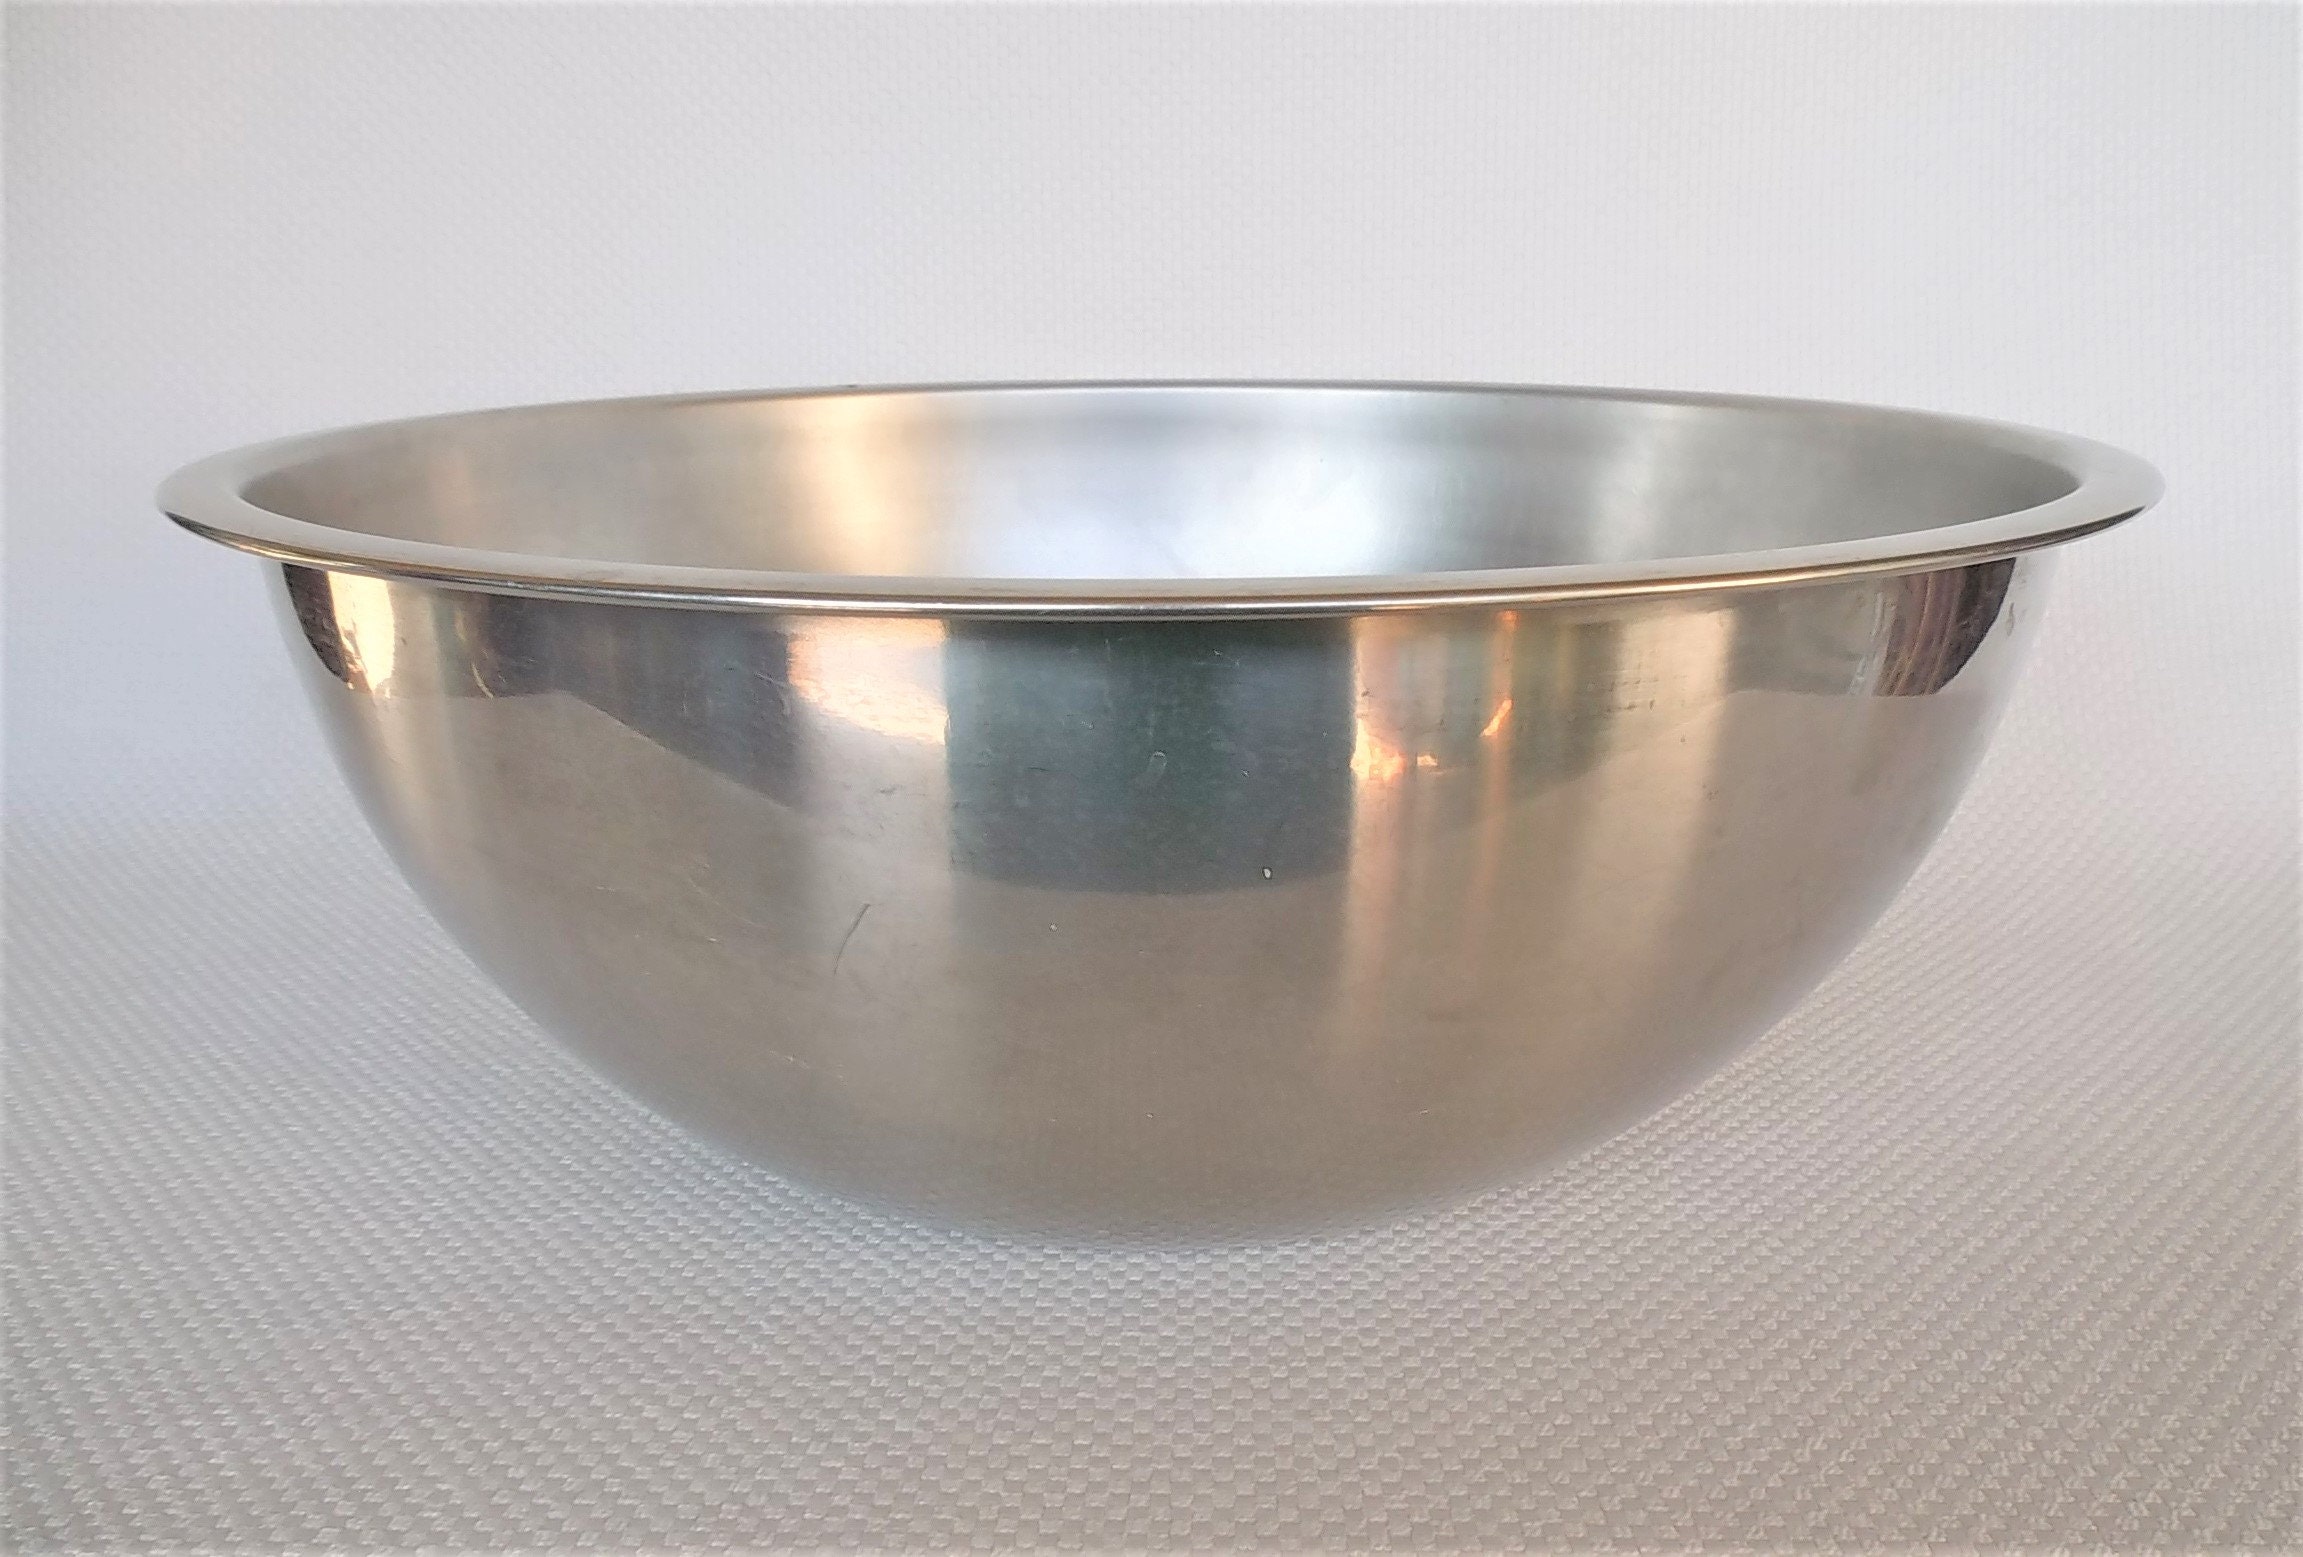 Vollrath 10 Qt. Stainless Steel Mixing Bowl